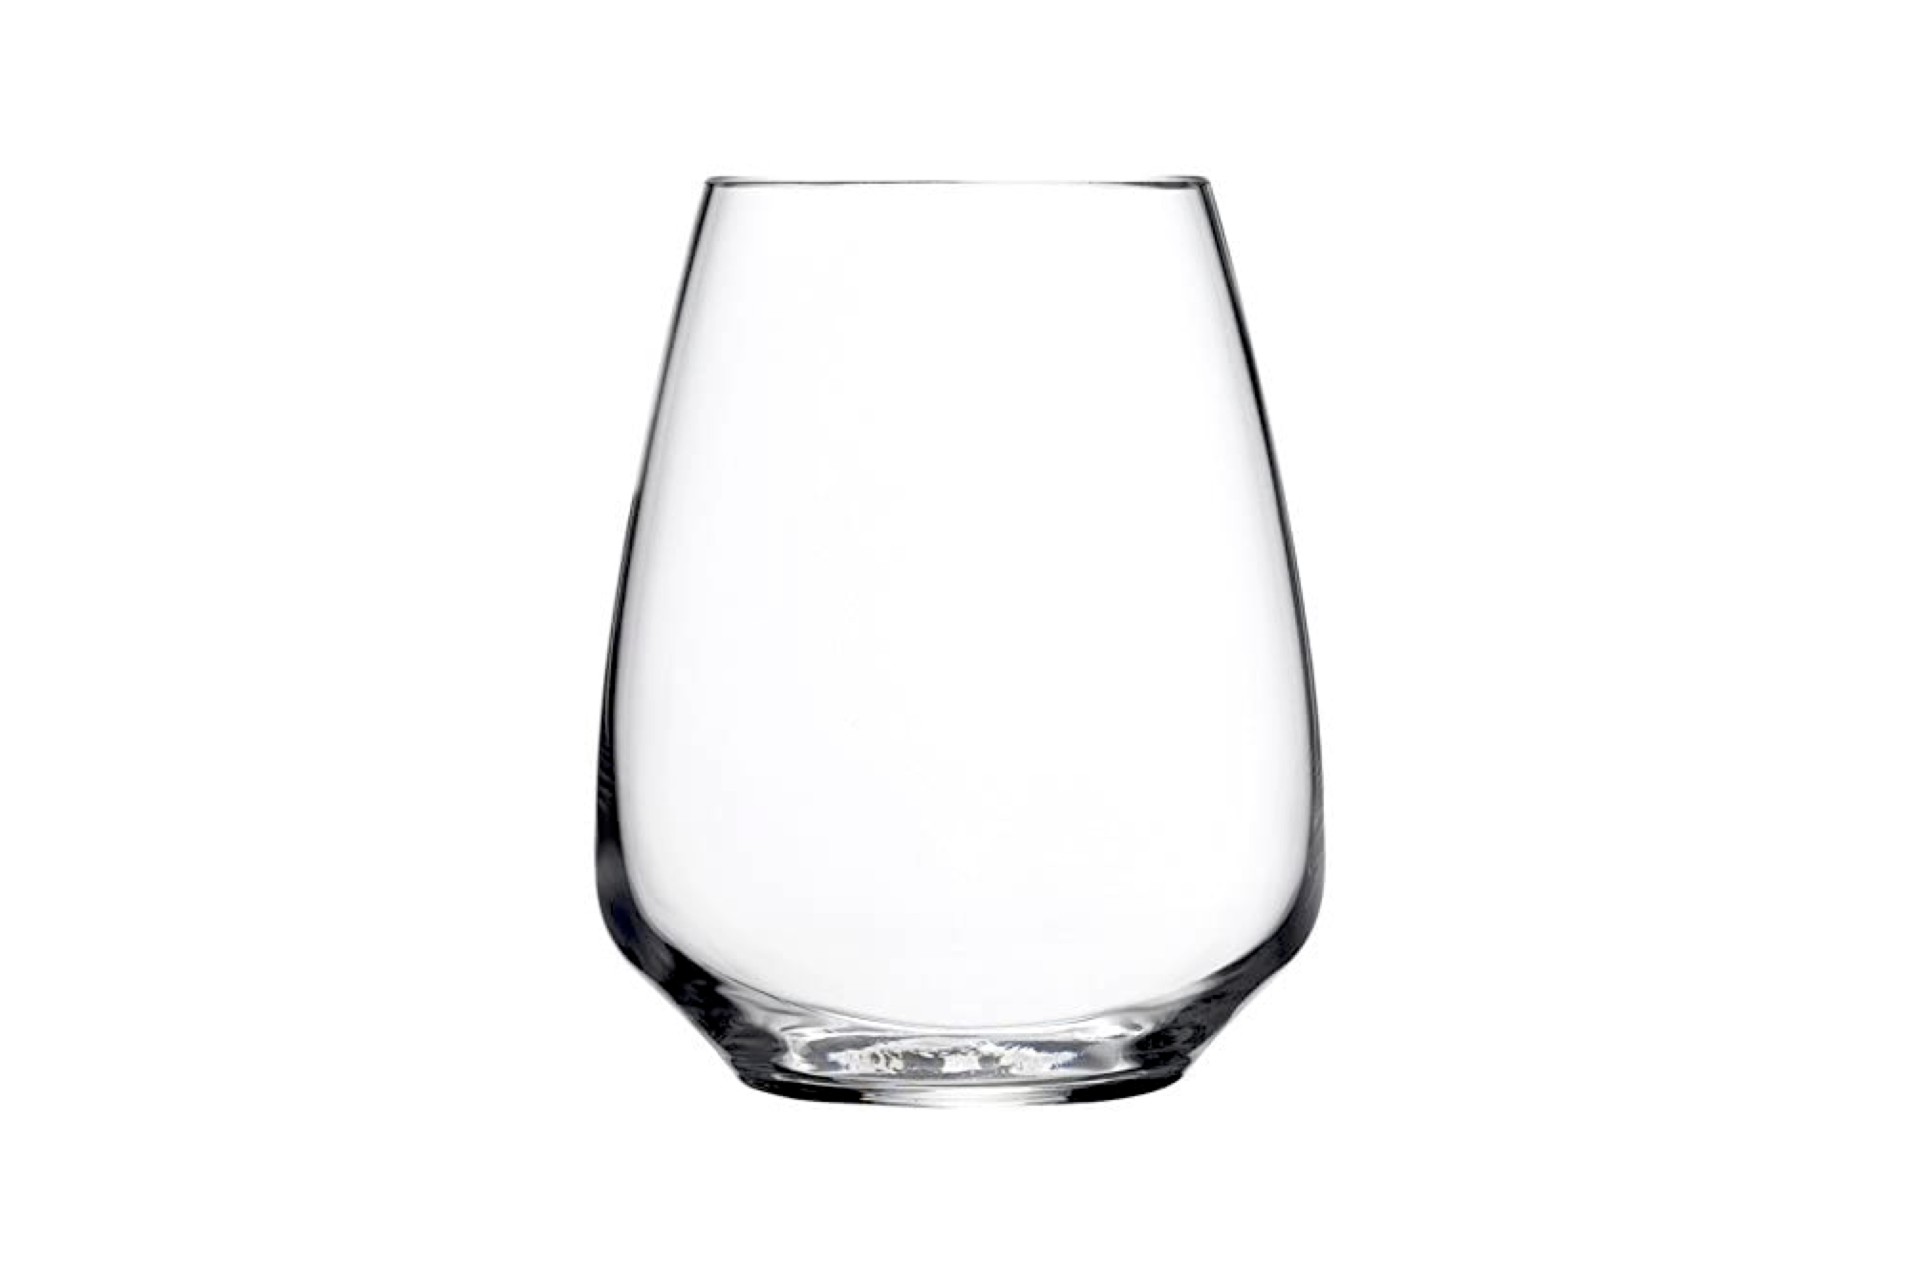 https://www.themanual.com/wp-content/uploads/sites/9/2021/02/bormioli-stemless-riesling-glass.jpg?fit=800%2C533&p=1